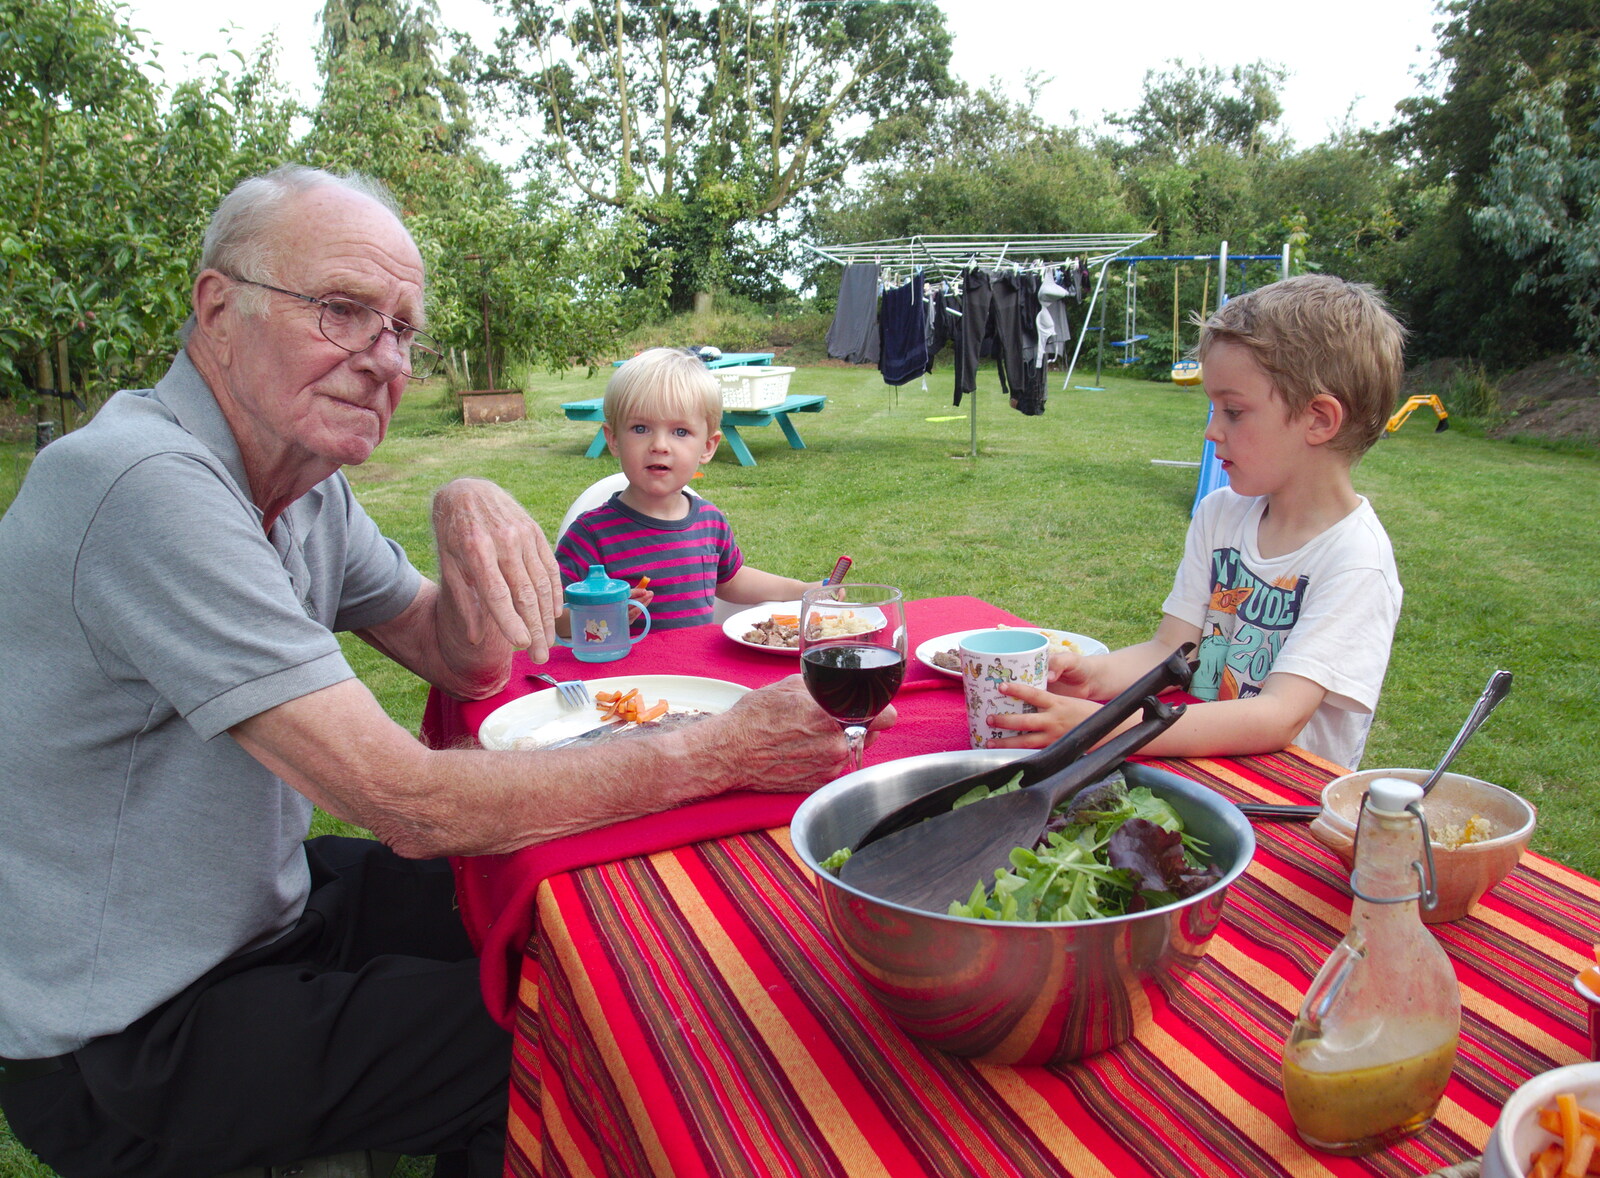 Grandad and the boys eat tea in the garden from The BBs at Diss Rugby Club, Bellrope Lane, Roydon, Norfolk - 7th June 2014